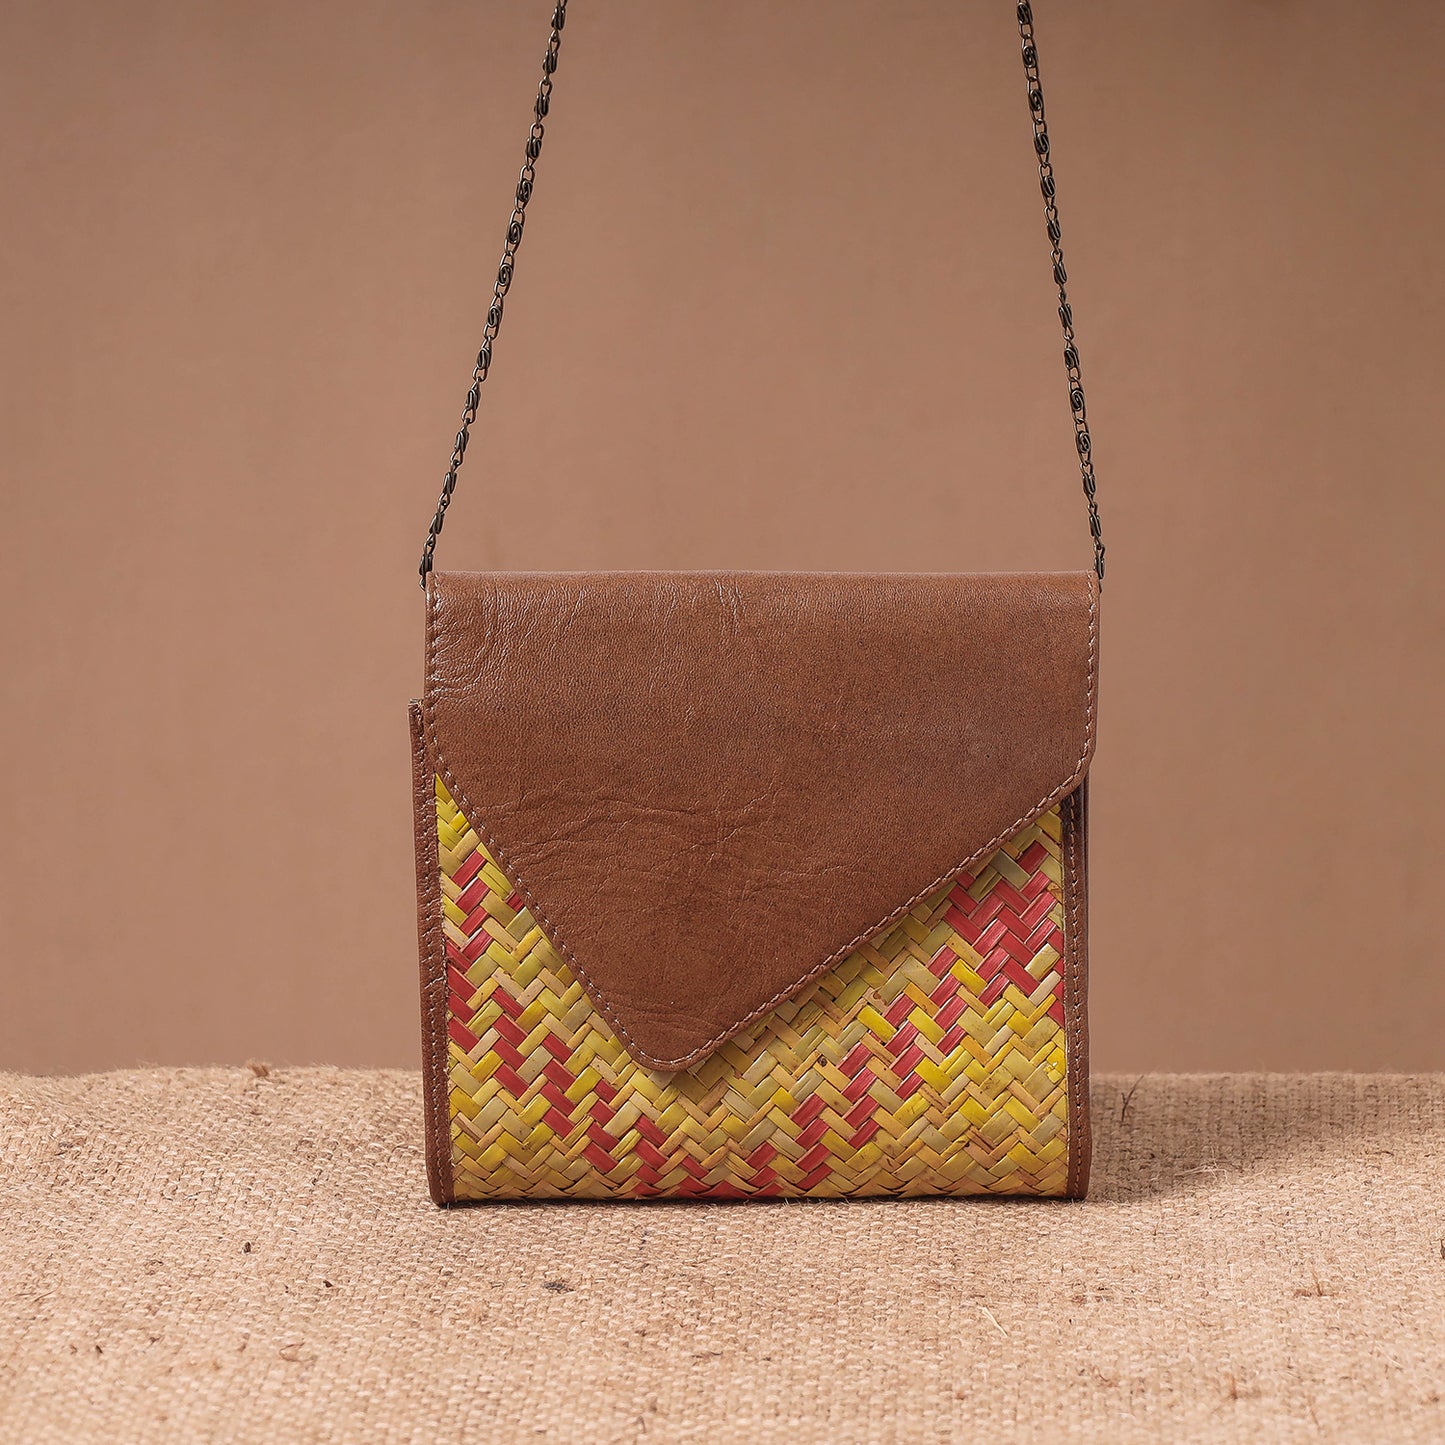 Brown - Sitalpati शीतल पाटी Grass Handwoven Sling Bag with Leather Flap